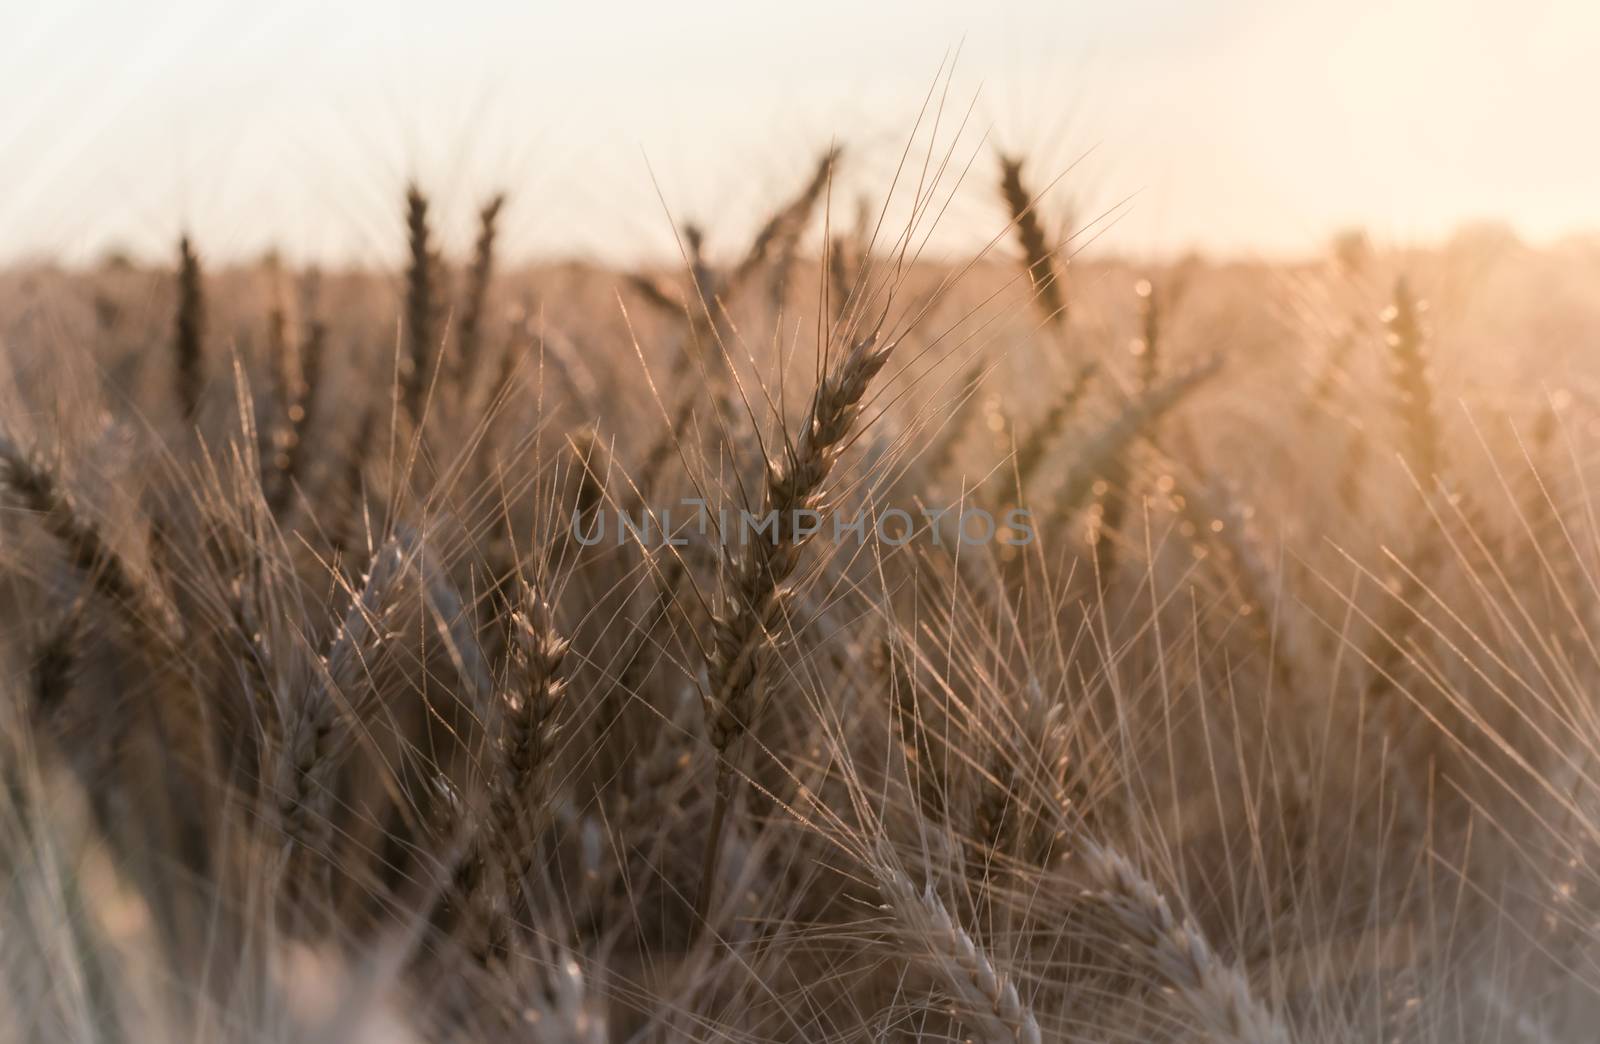 spikelets of wheat at sunset blurry nature background harvest